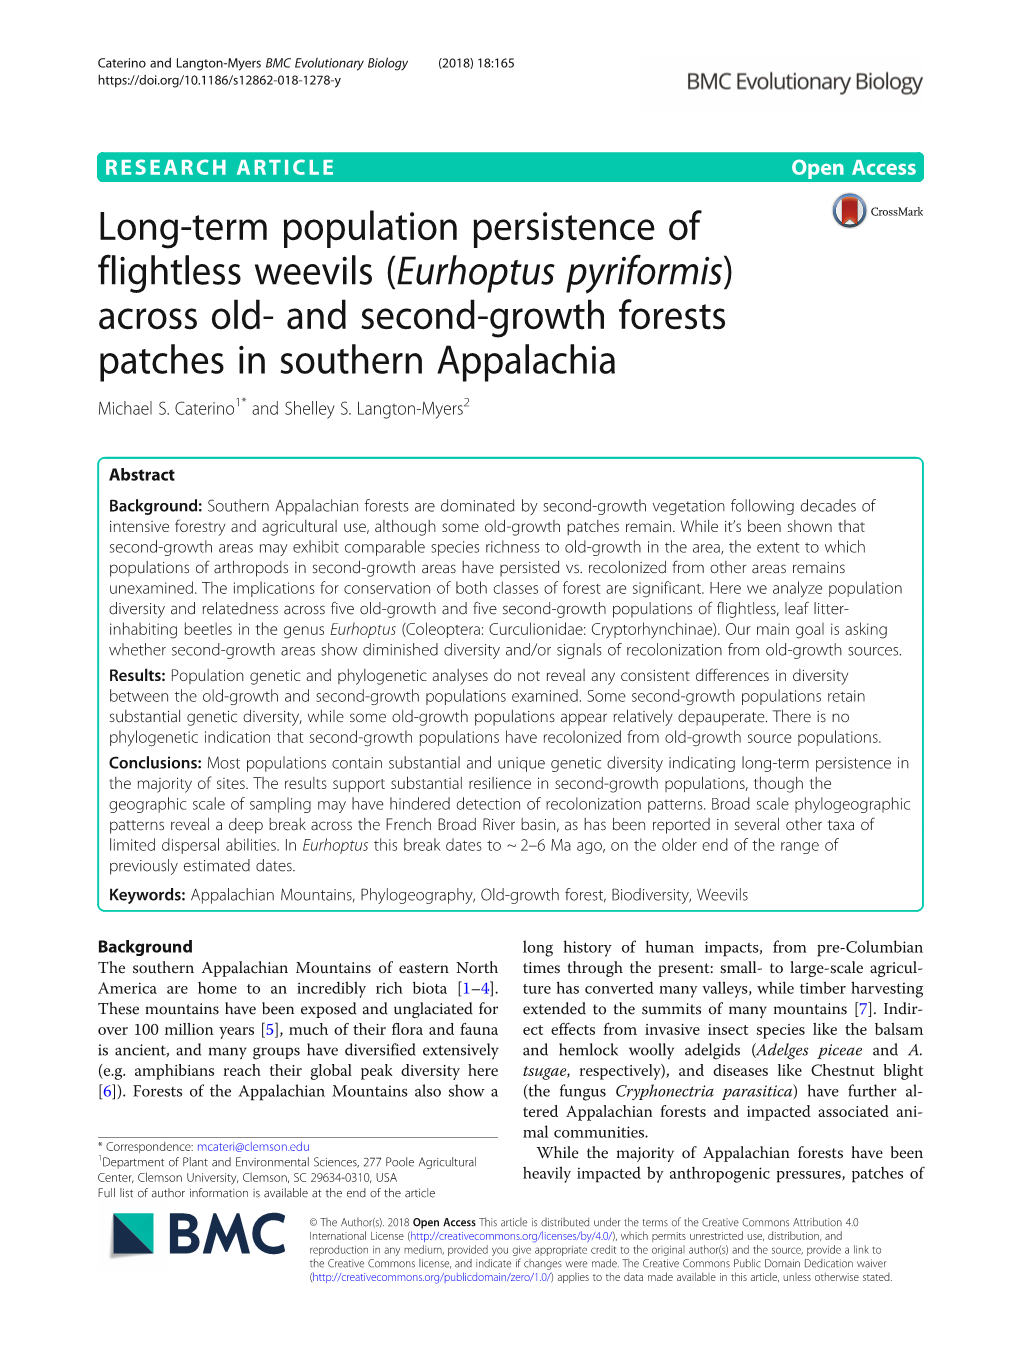 (Eurhoptus Pyriformis) Across Old- and Second-Growth Forests Patches in Southern Appalachia Michael S